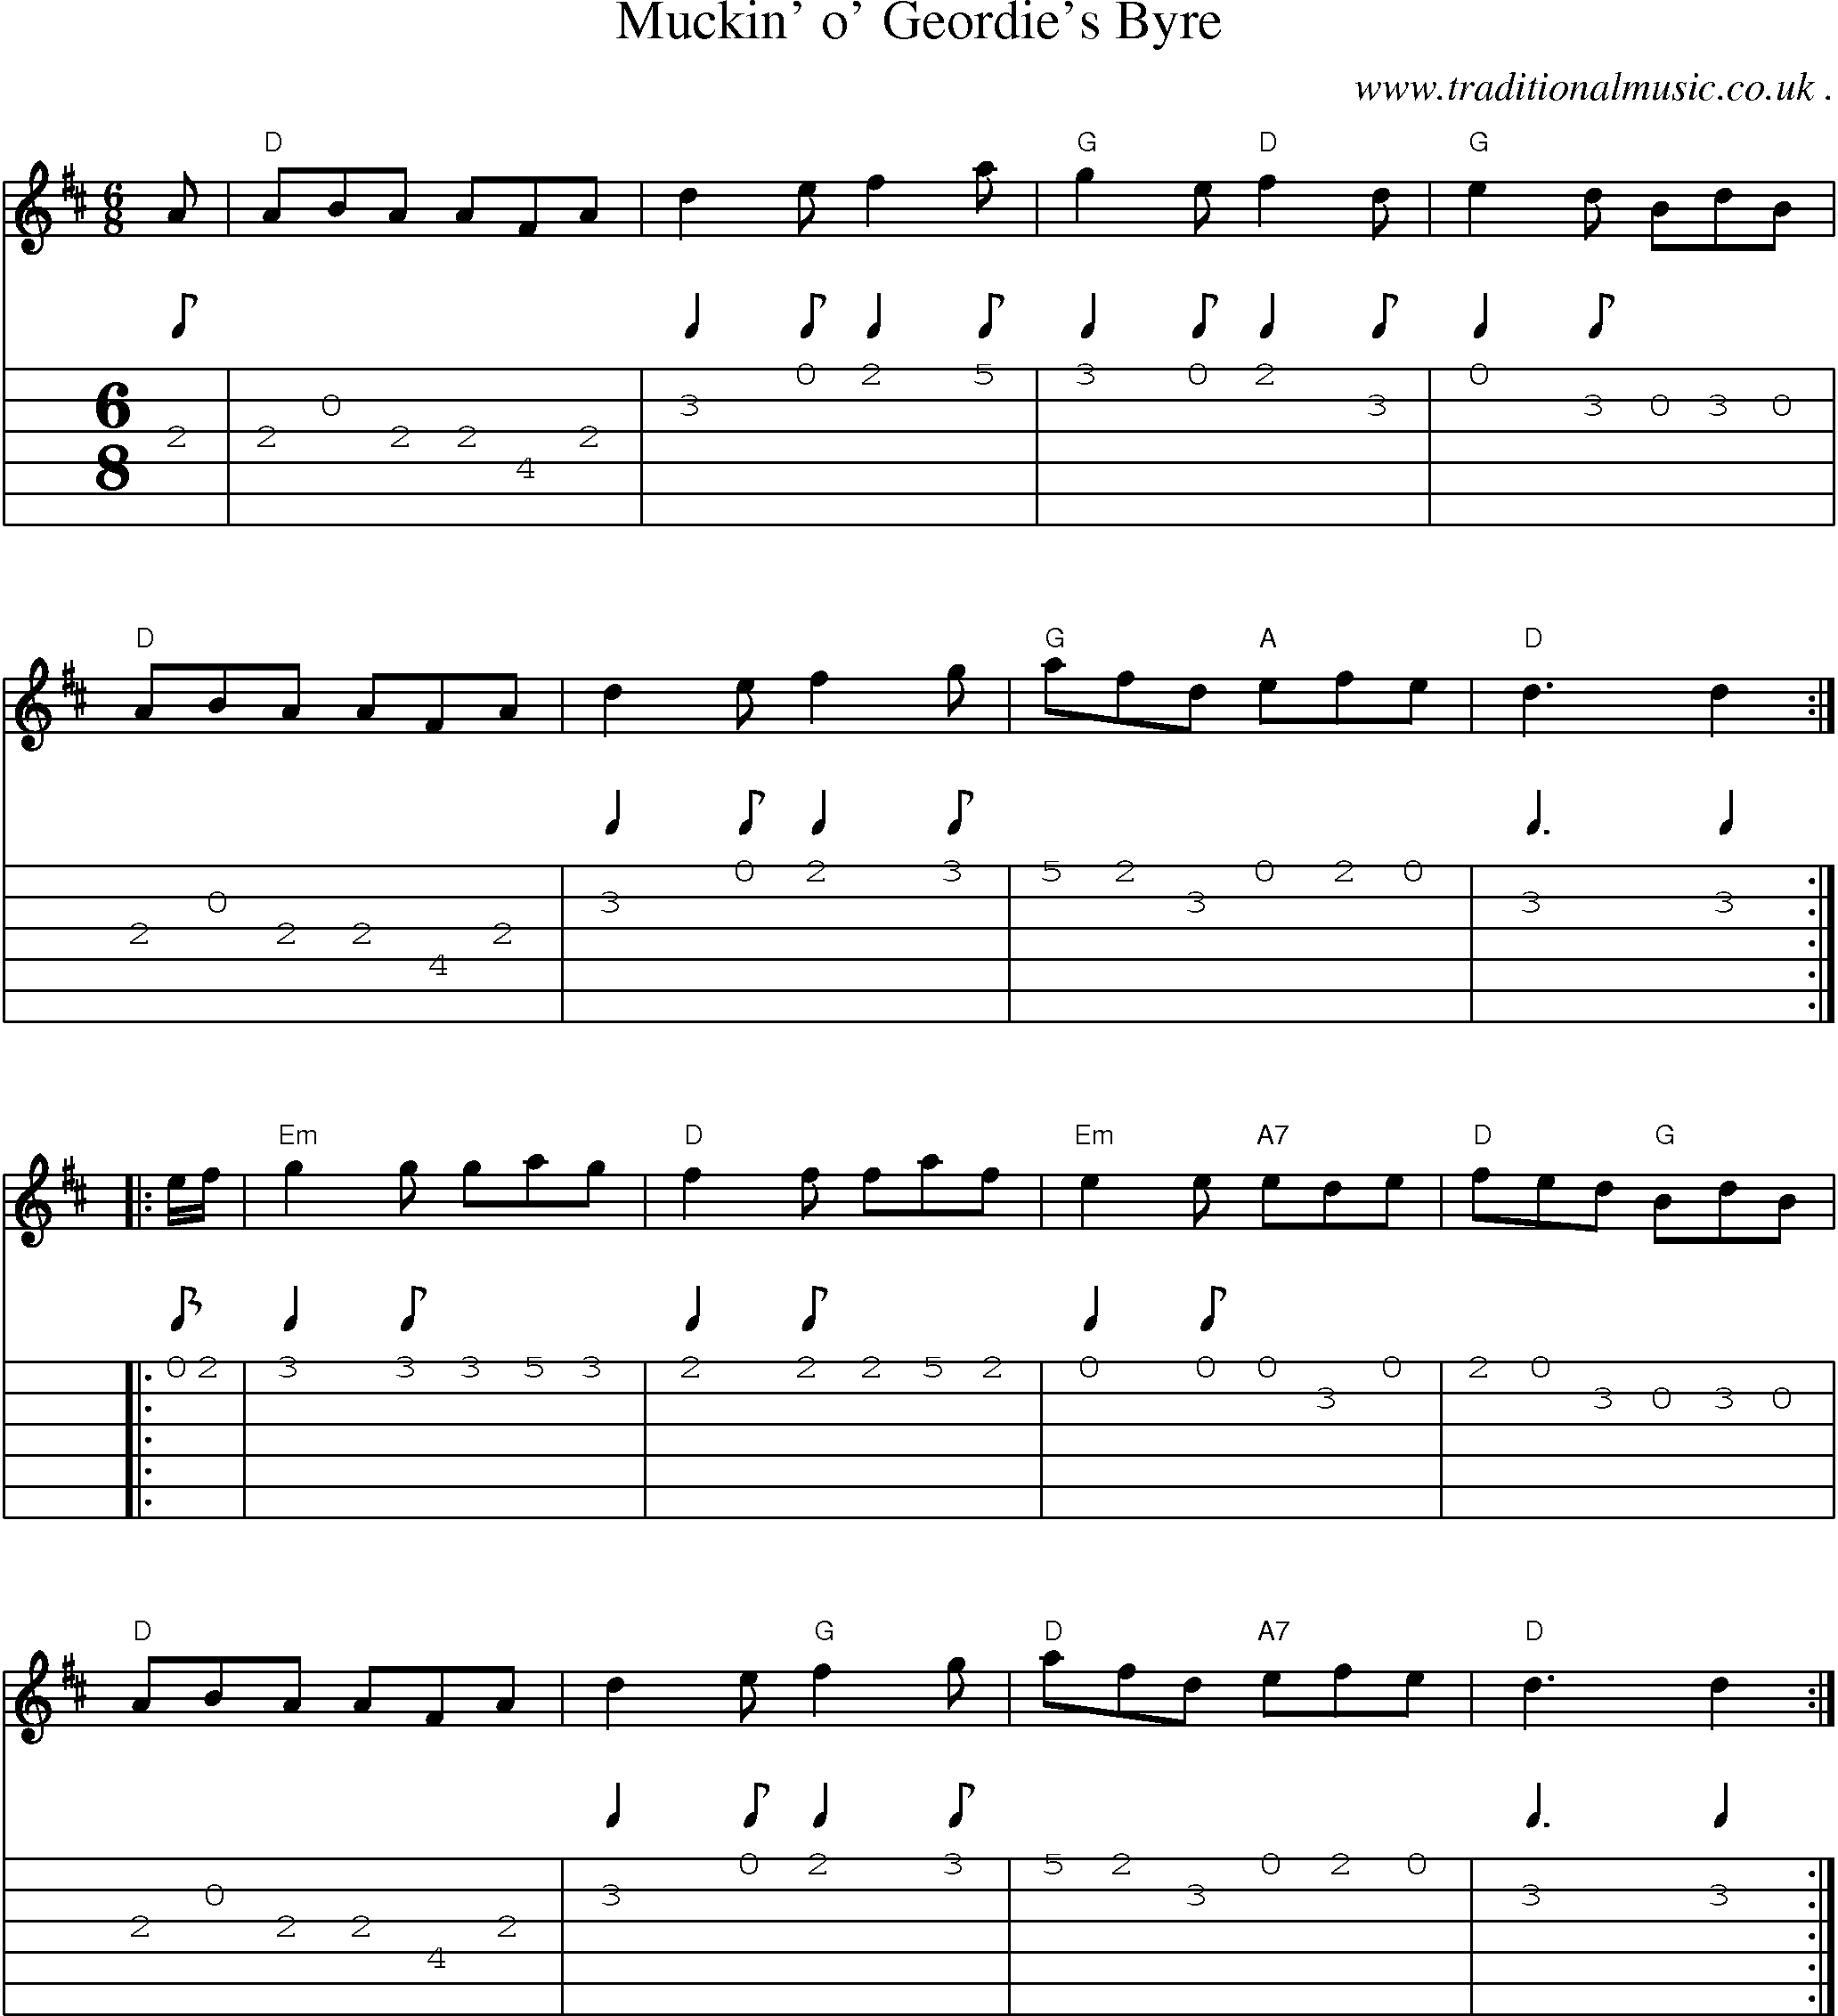 Music Score and Guitar Tabs for Muckin o Geordies Byre